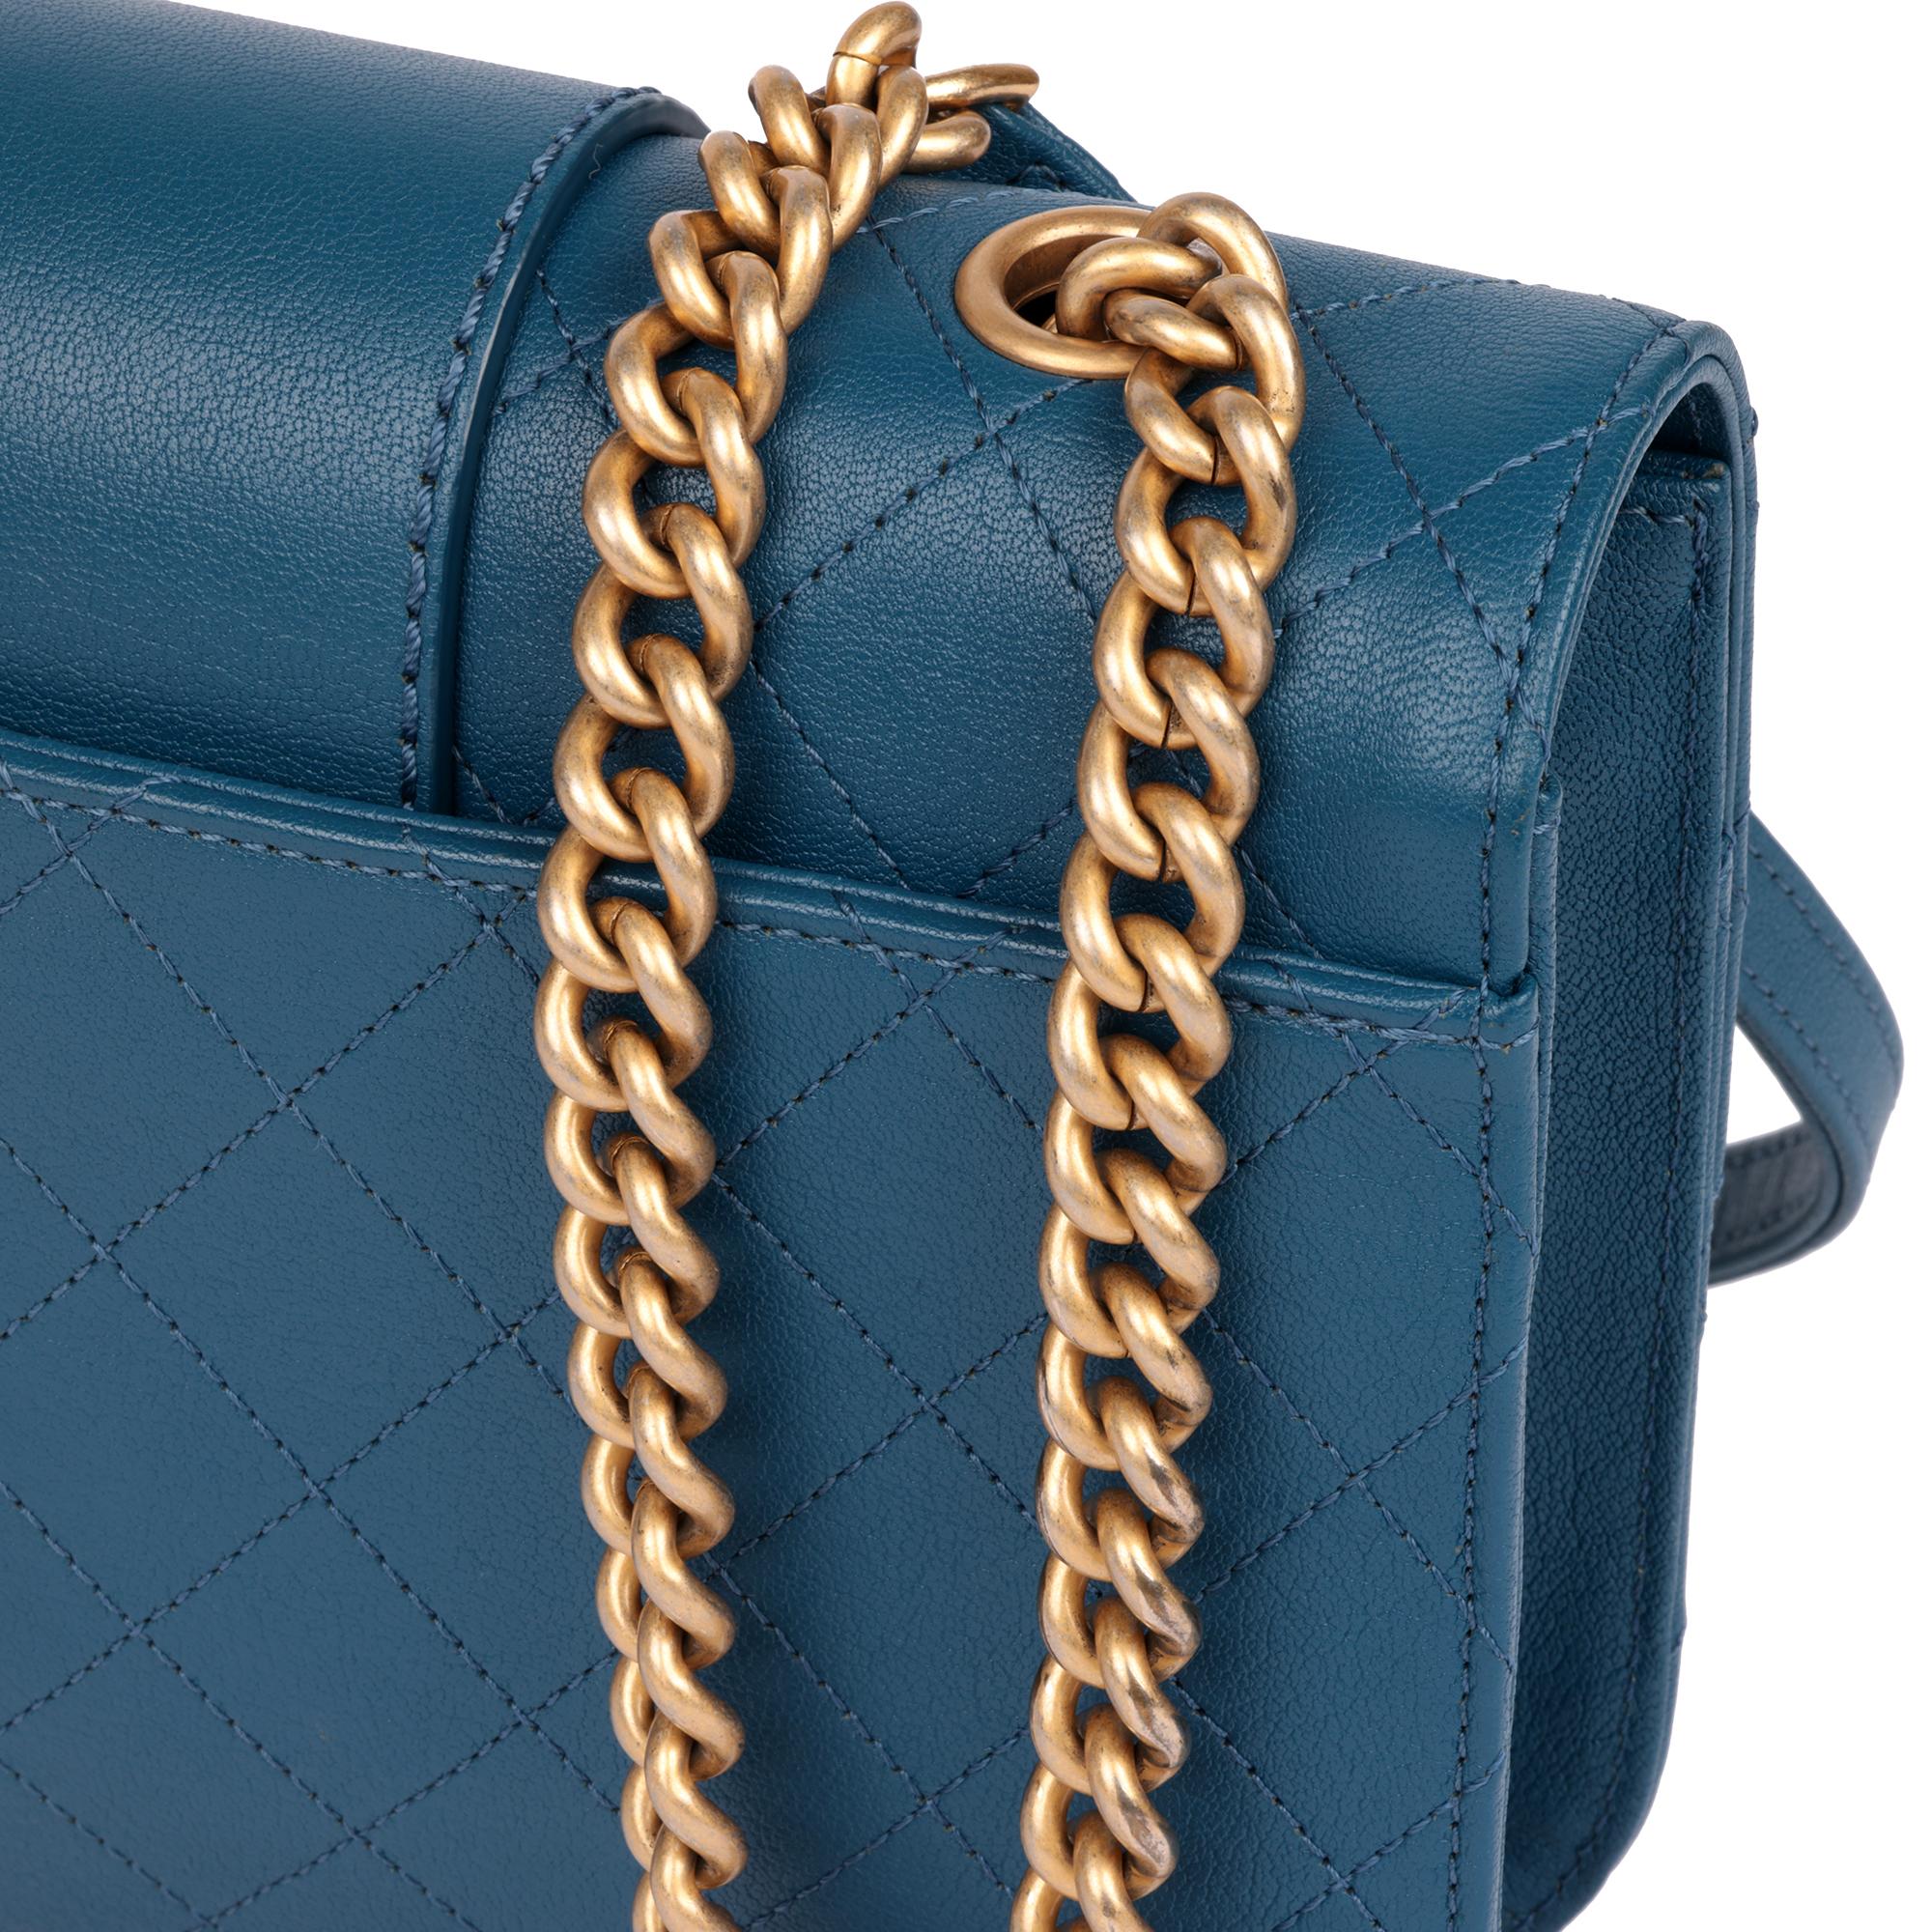 CHANEL Blue Quilted Calfskin Leather Mini Chain Front Classic Single Flap Bag For Sale 4